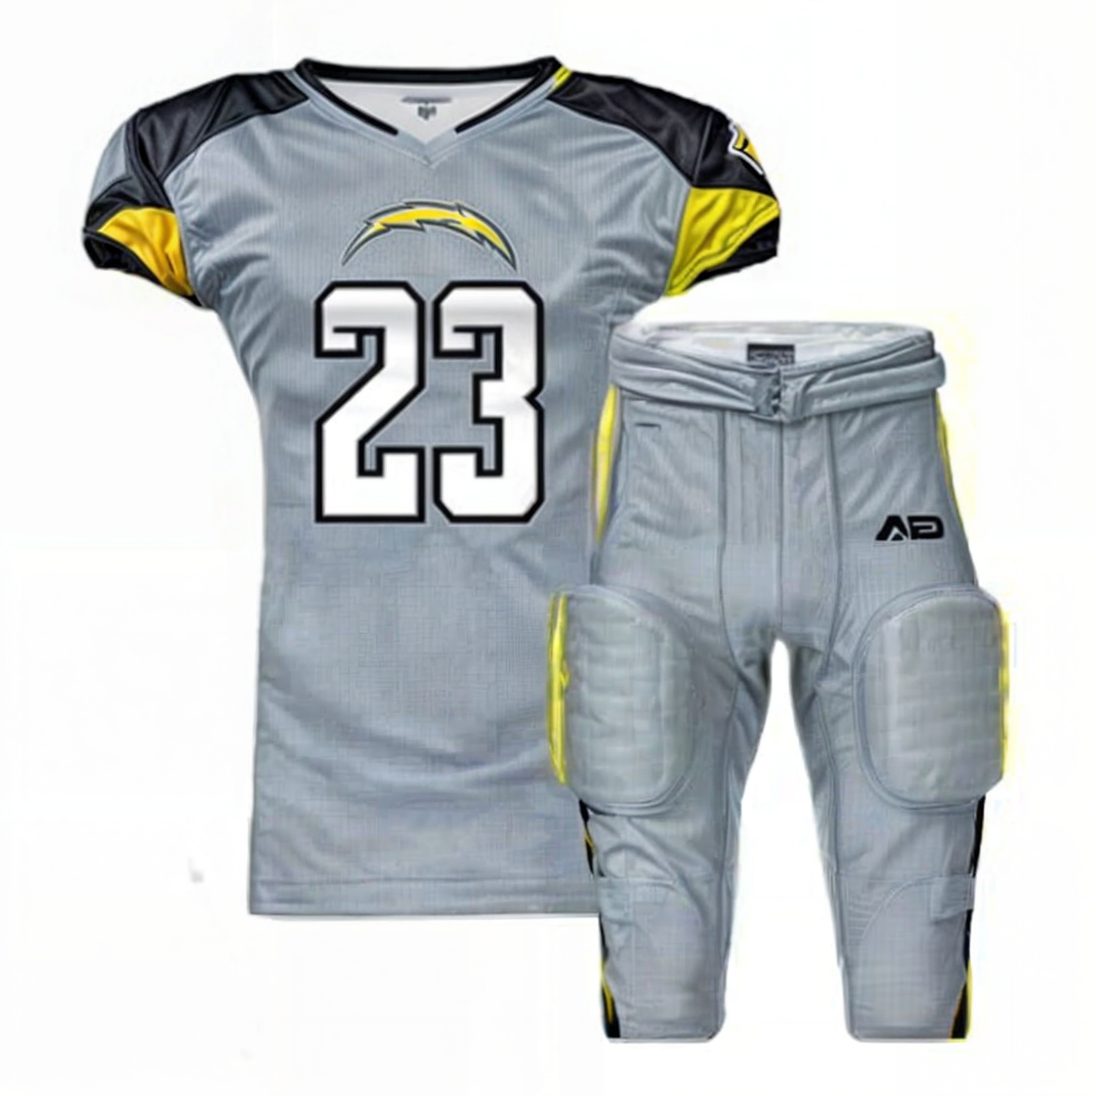 football team complete uniforms and kits